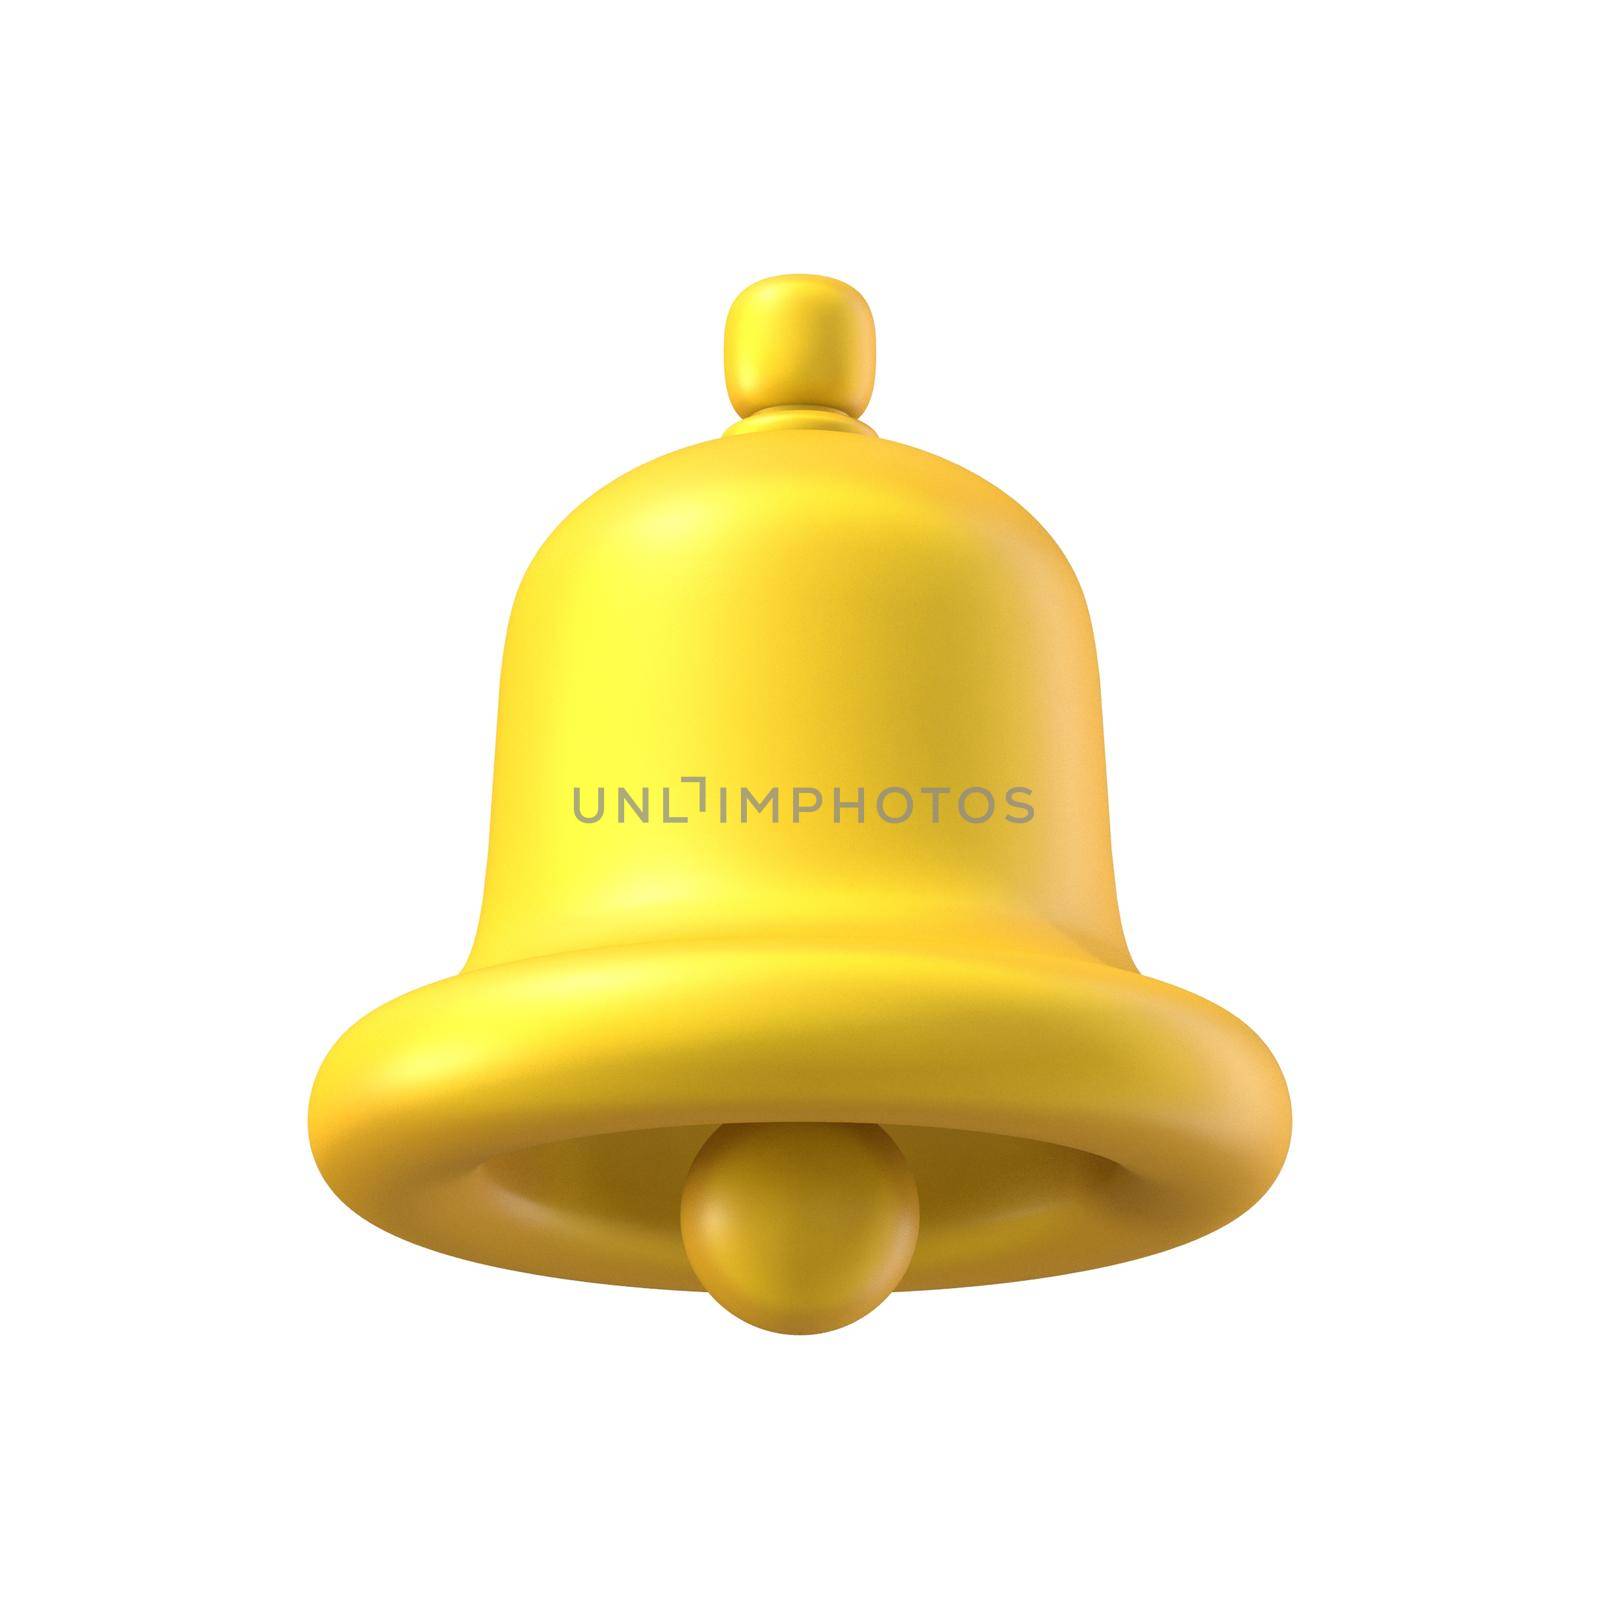 Yellow notification bell 3D rendering illustration isolated on white background